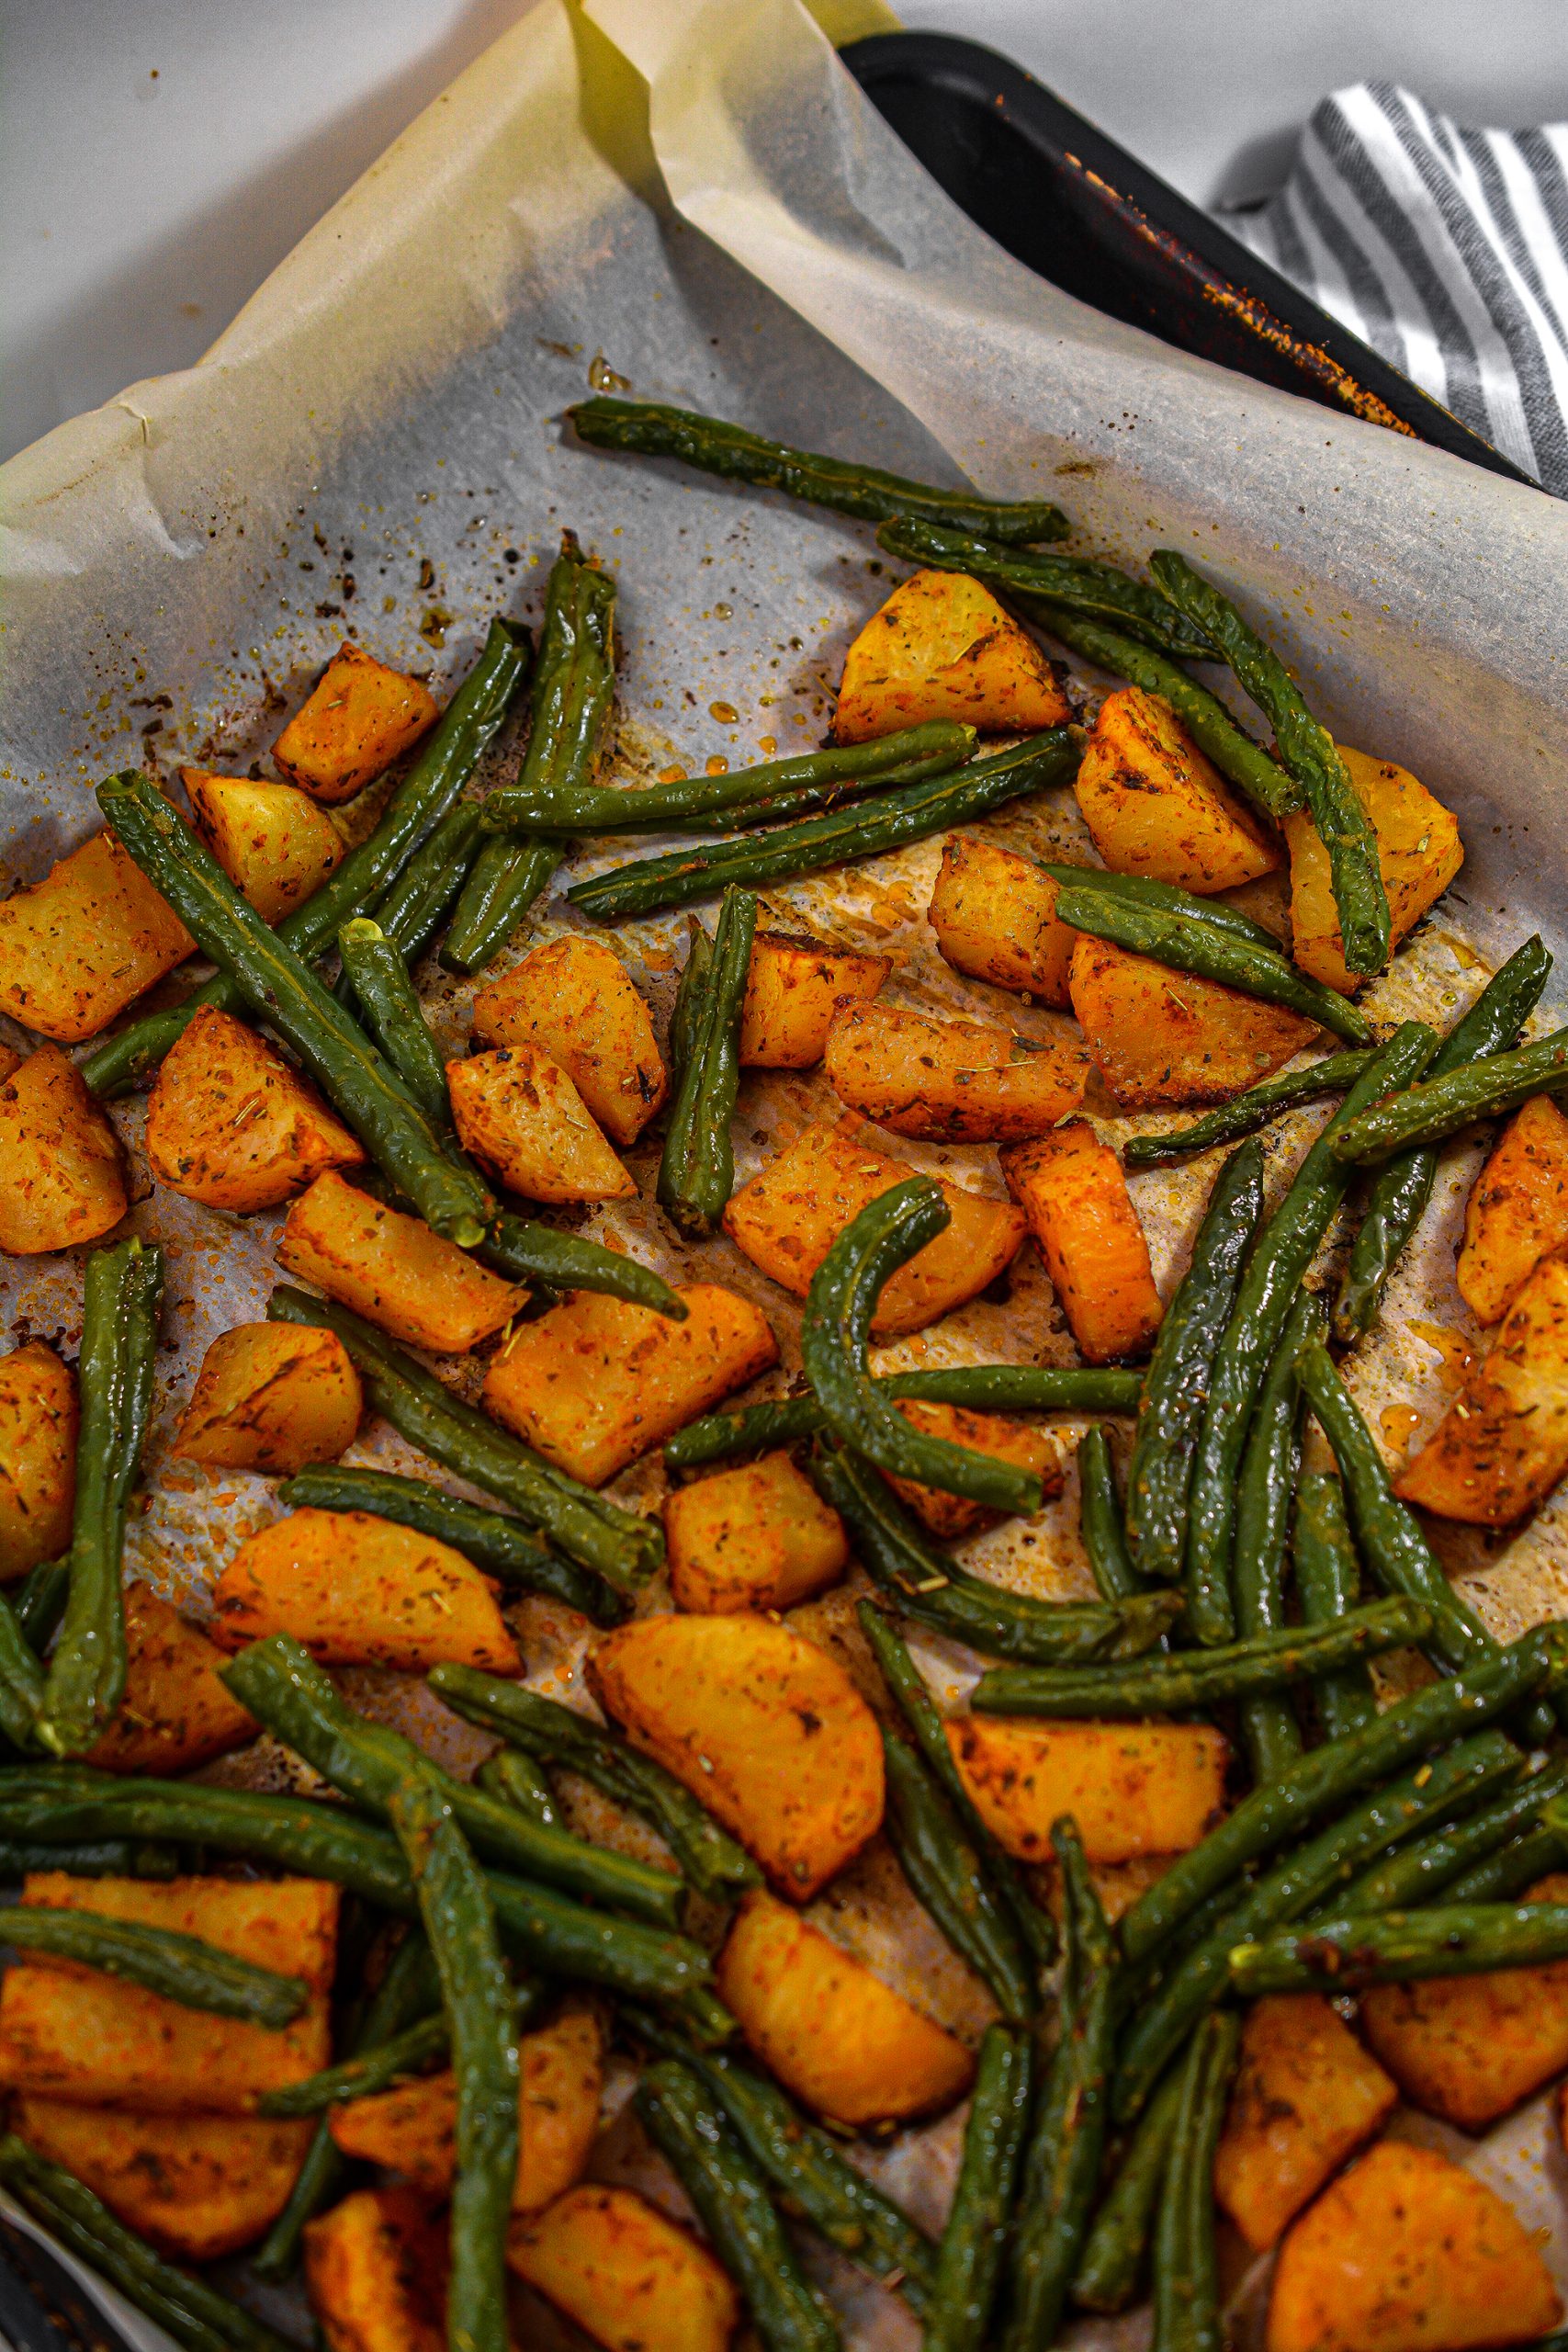 After 15 minutes, remove the potatoes from the oven and add the green beans to the tray.